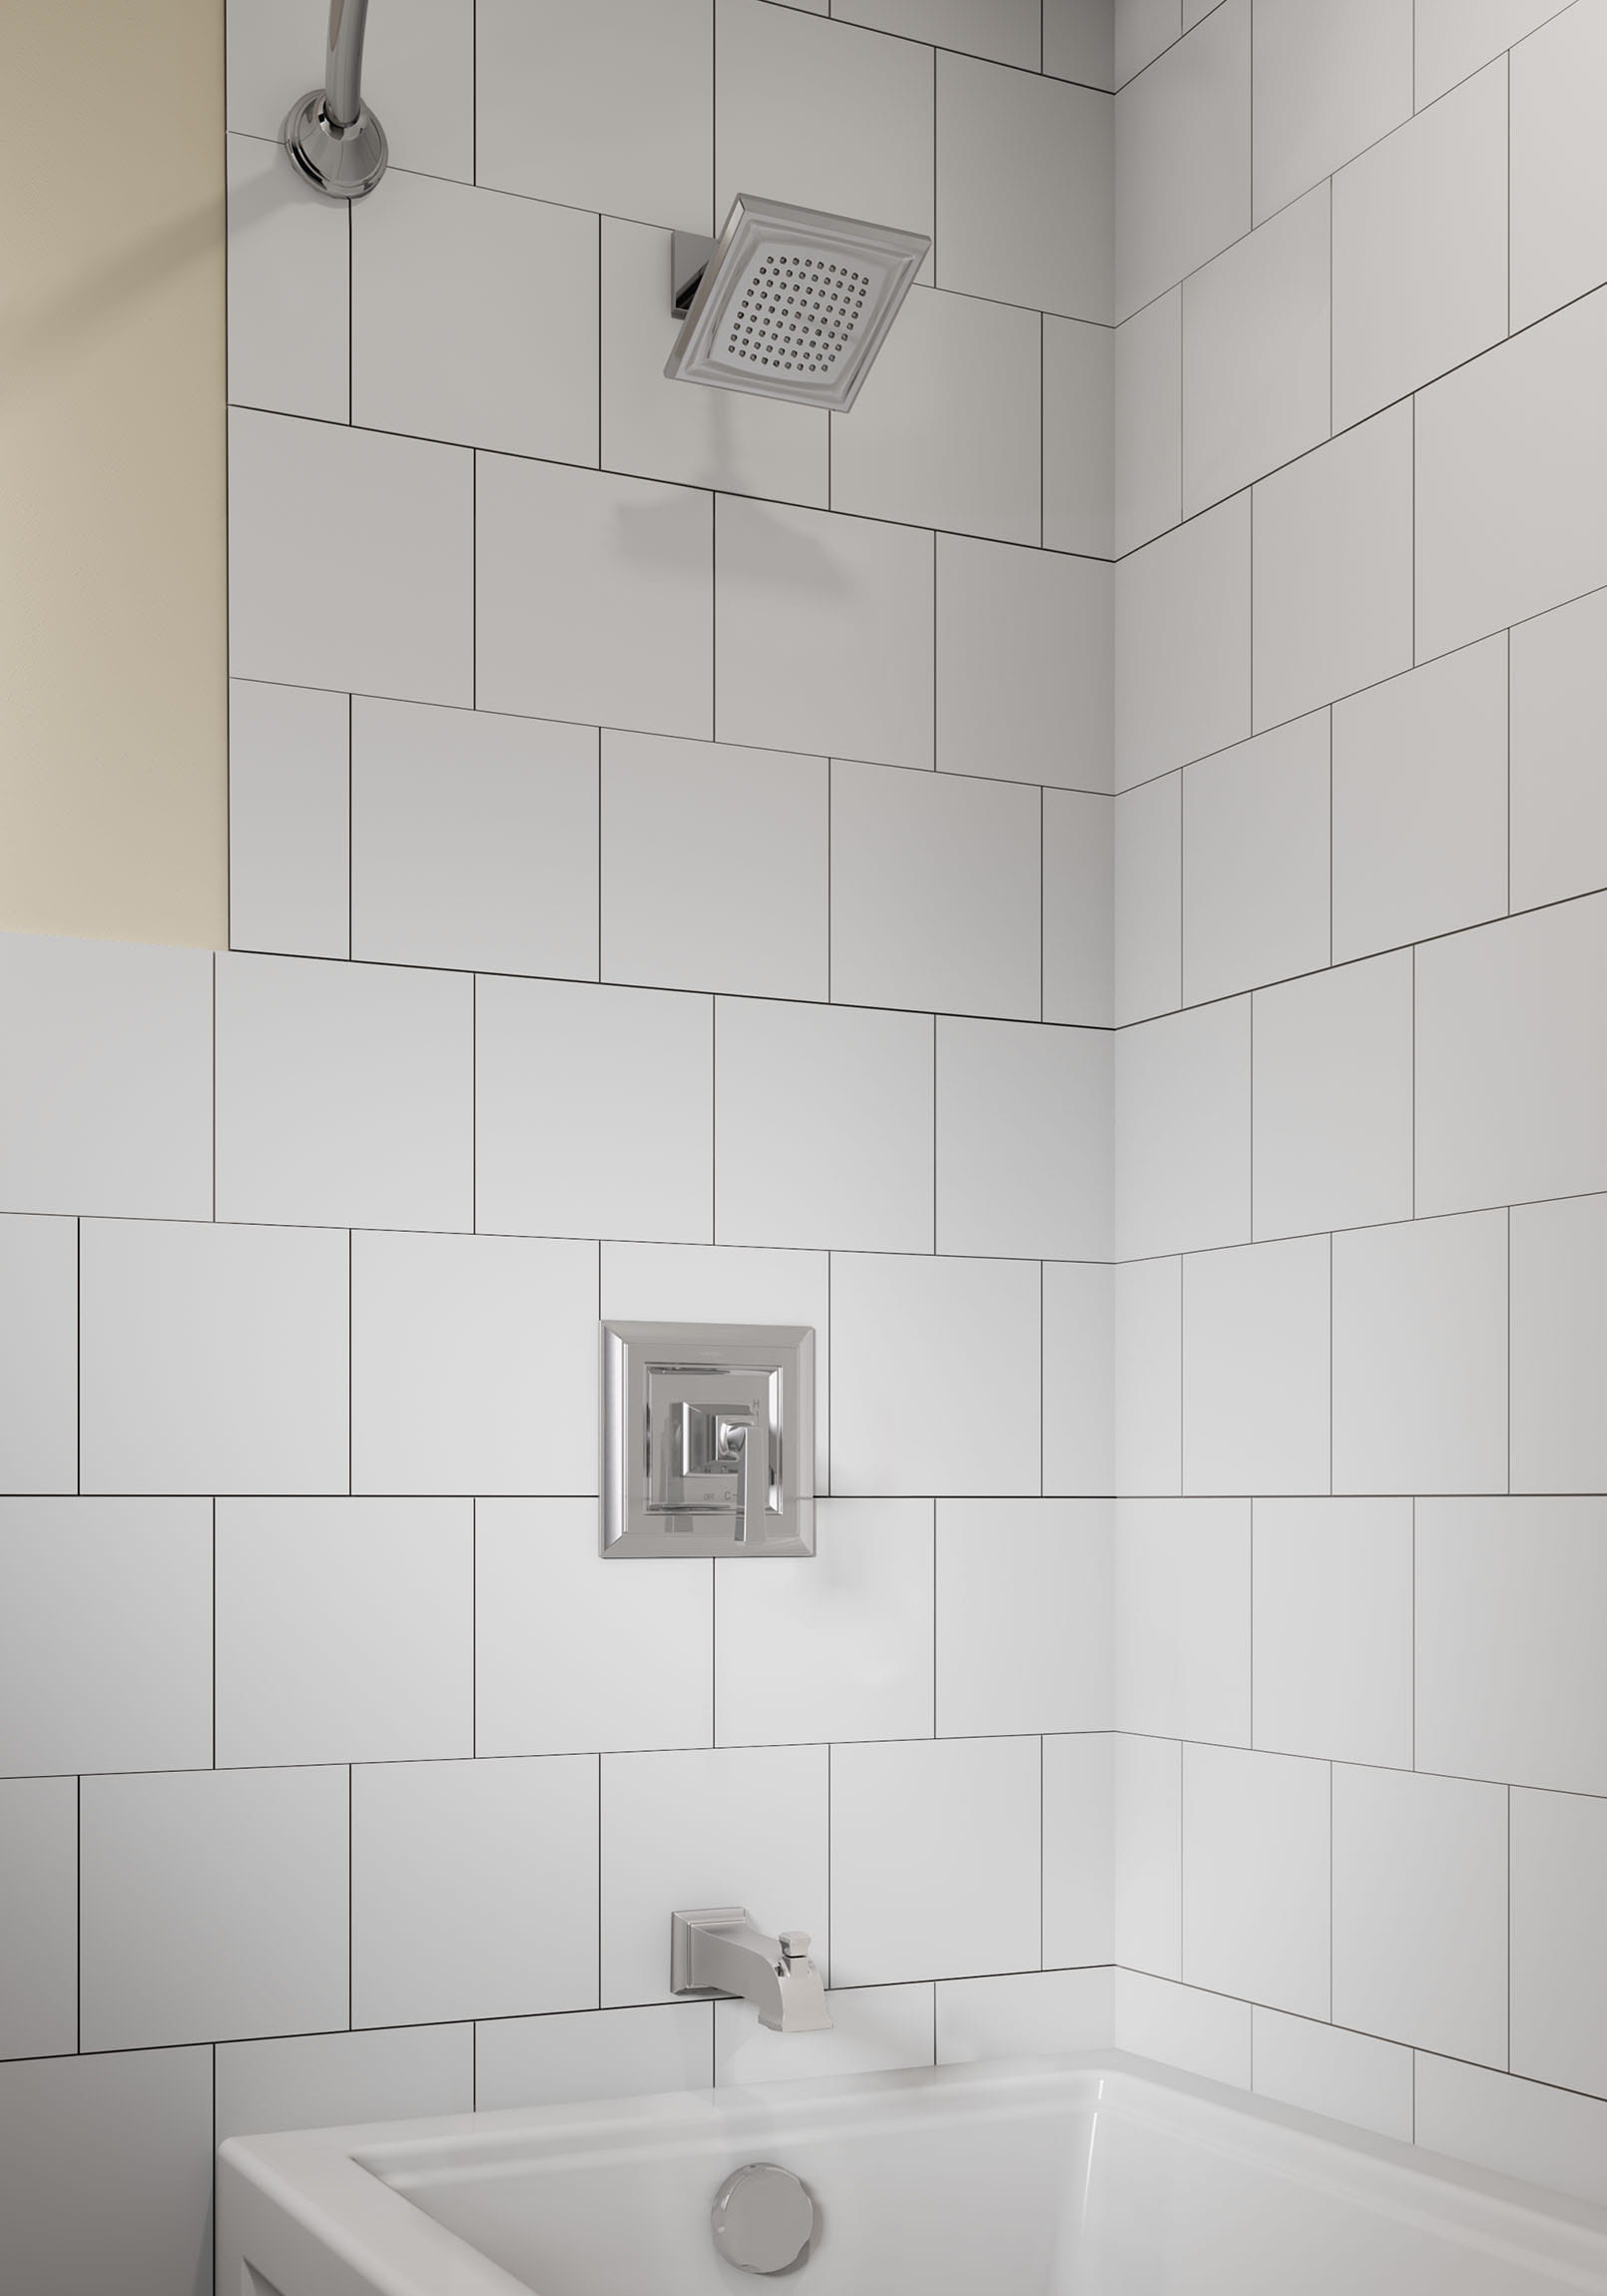 Town Square S 25 gpm 95 L min Tub and Shower Trim Kit With Single Function Showerhead Double Ceramic Pressure Balance Cartridge With Lever Handle CHROME